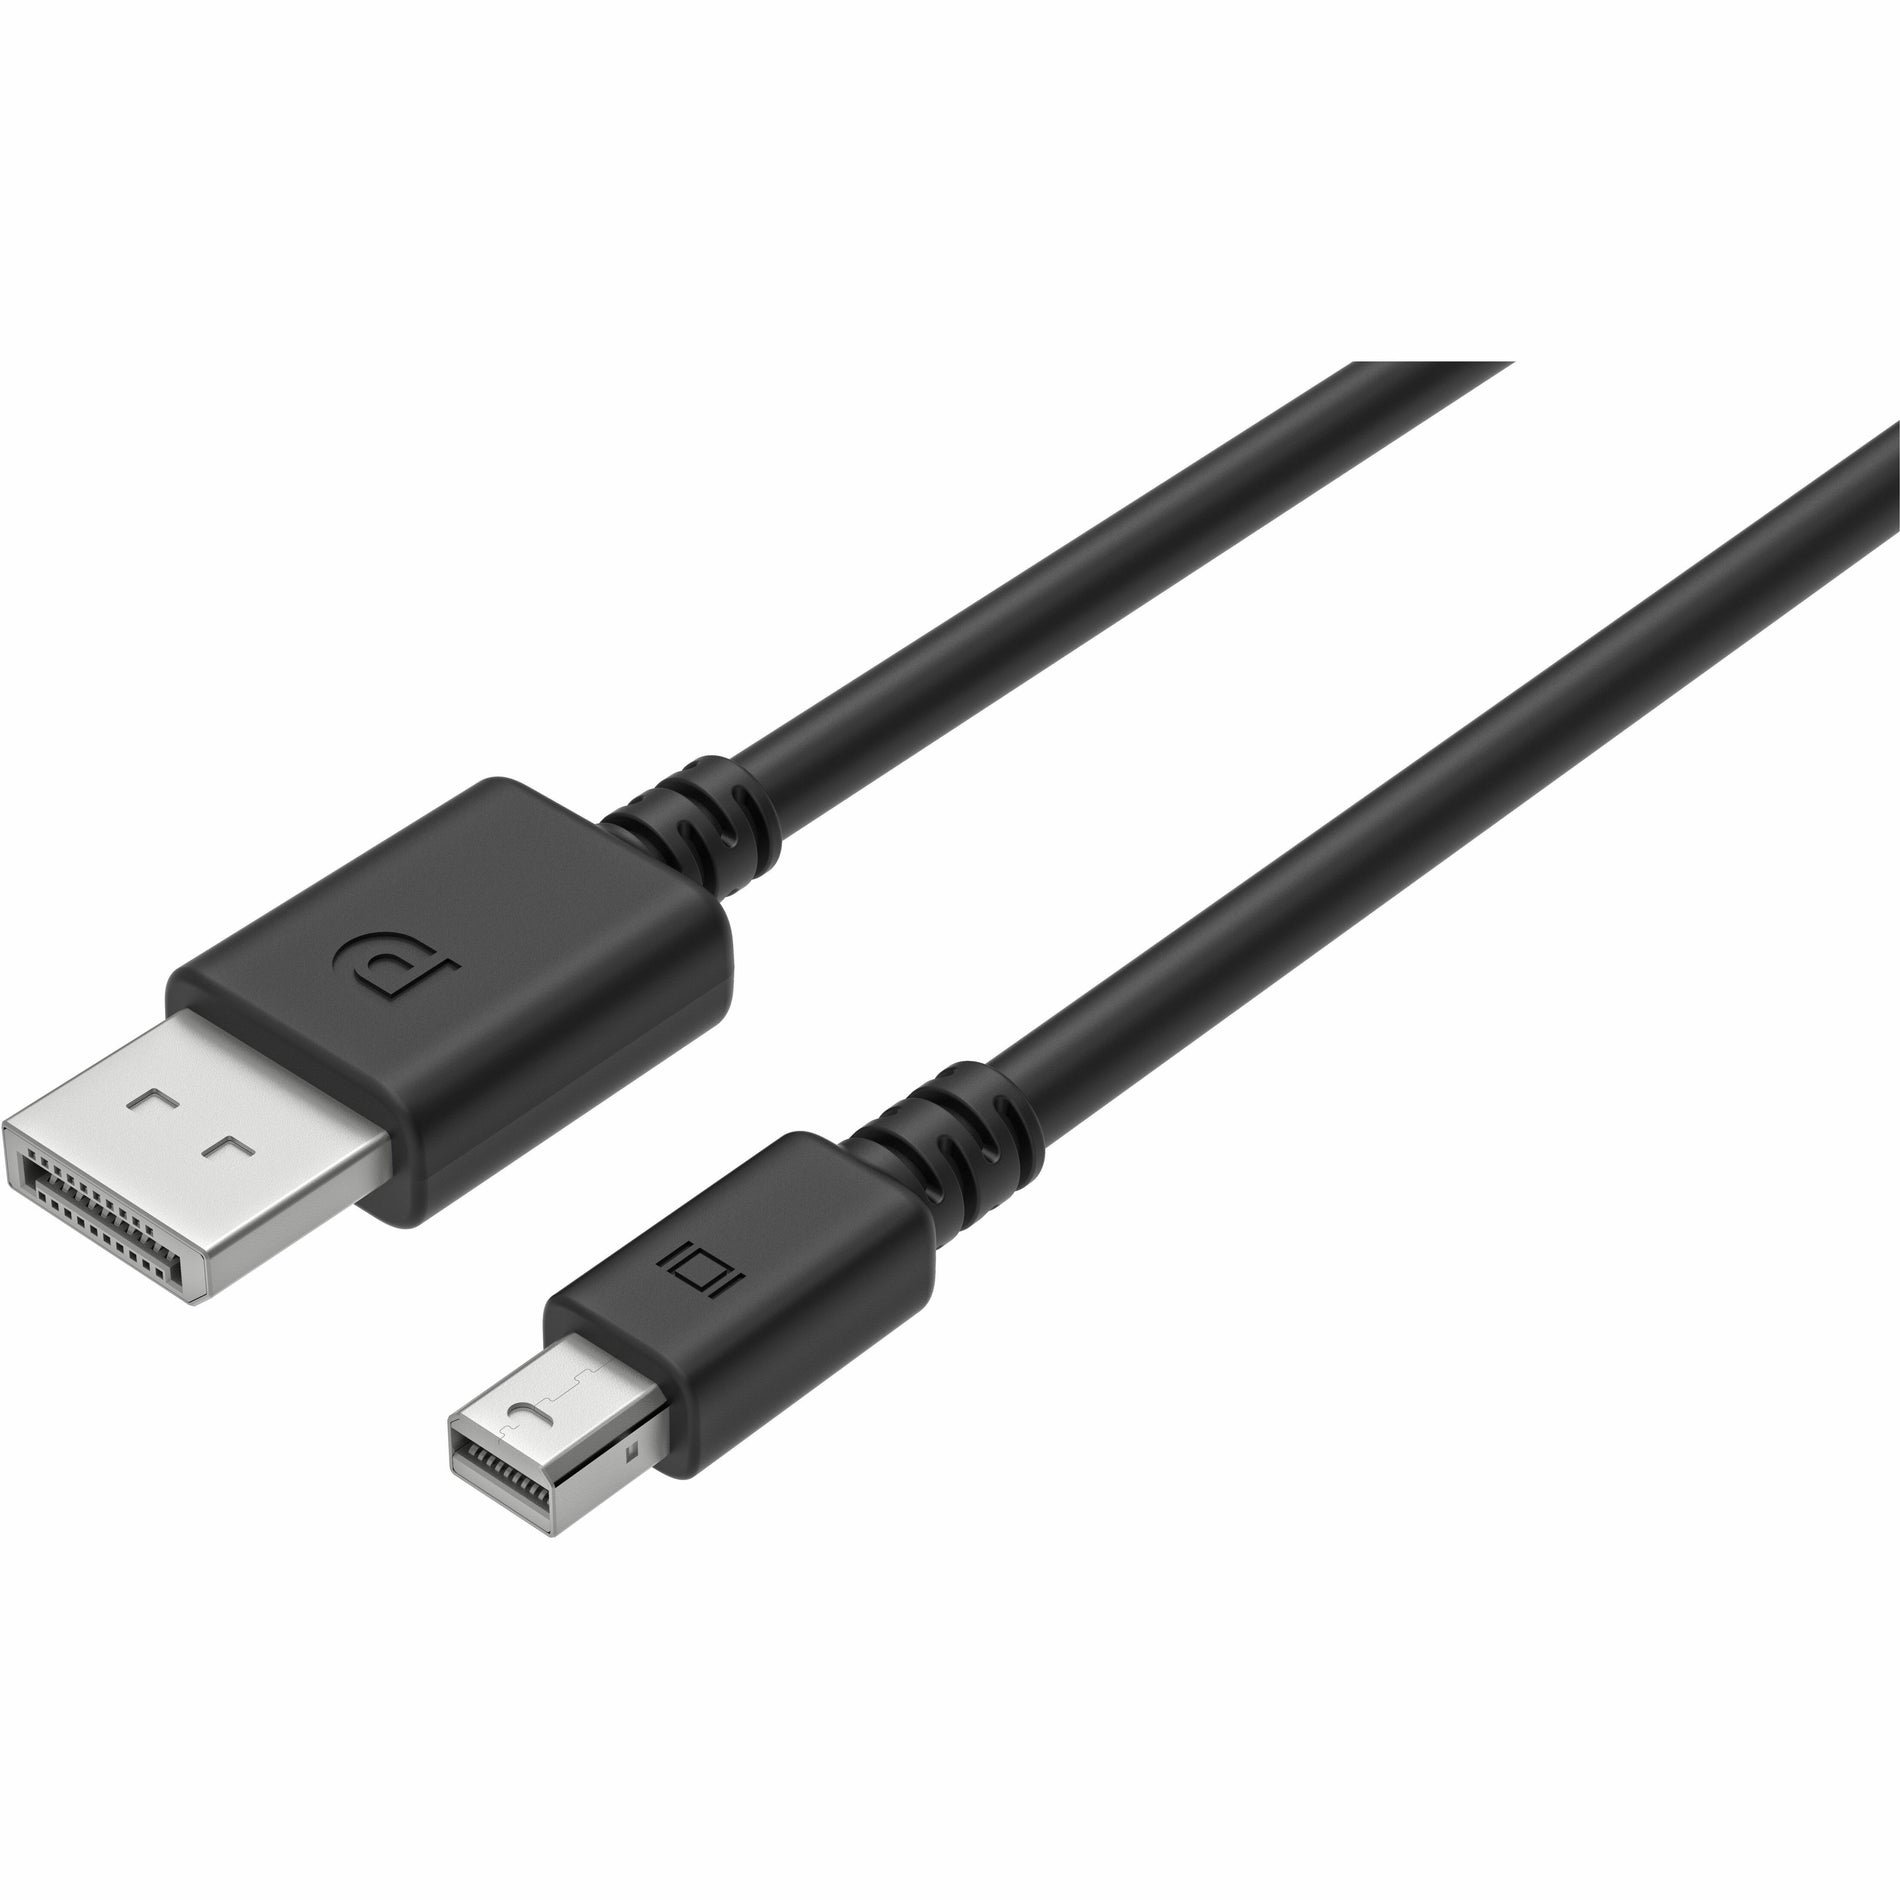 HTC 99H20525-00 DisplayPort/Mini DisplayPort Audio/Video Cable, High-Quality Connection for Audio and Video Devices